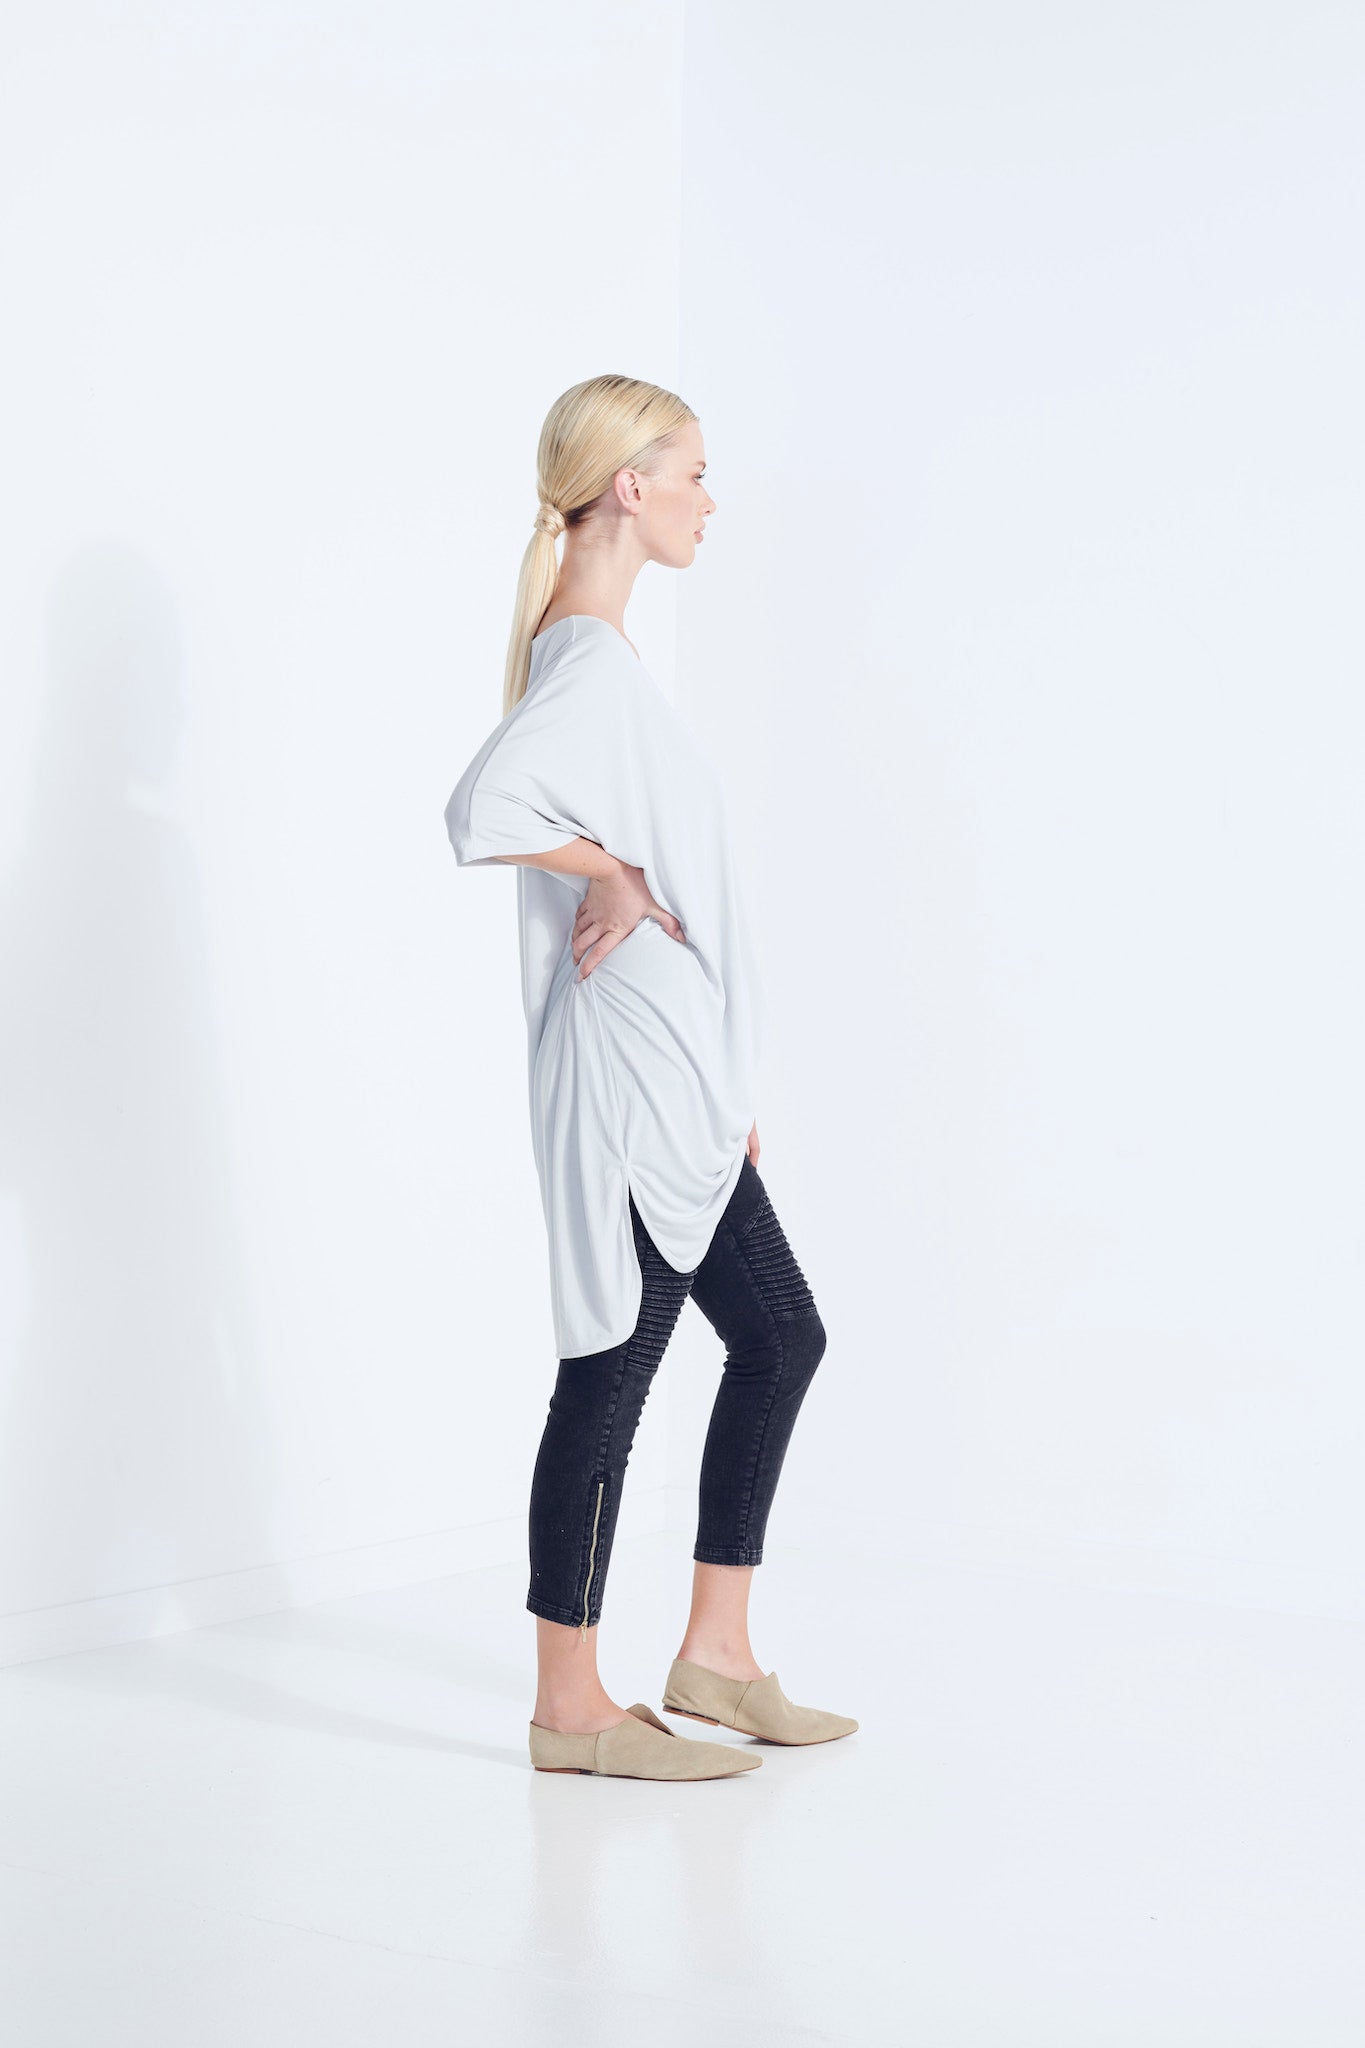 THEMIS DRESS LONGLINE T-SHIRT BEECHWOOD MODAL STRETCH WITH REMOVABLE TIE WISP PALE WASHED GREY  SIDE TEE VIEW 